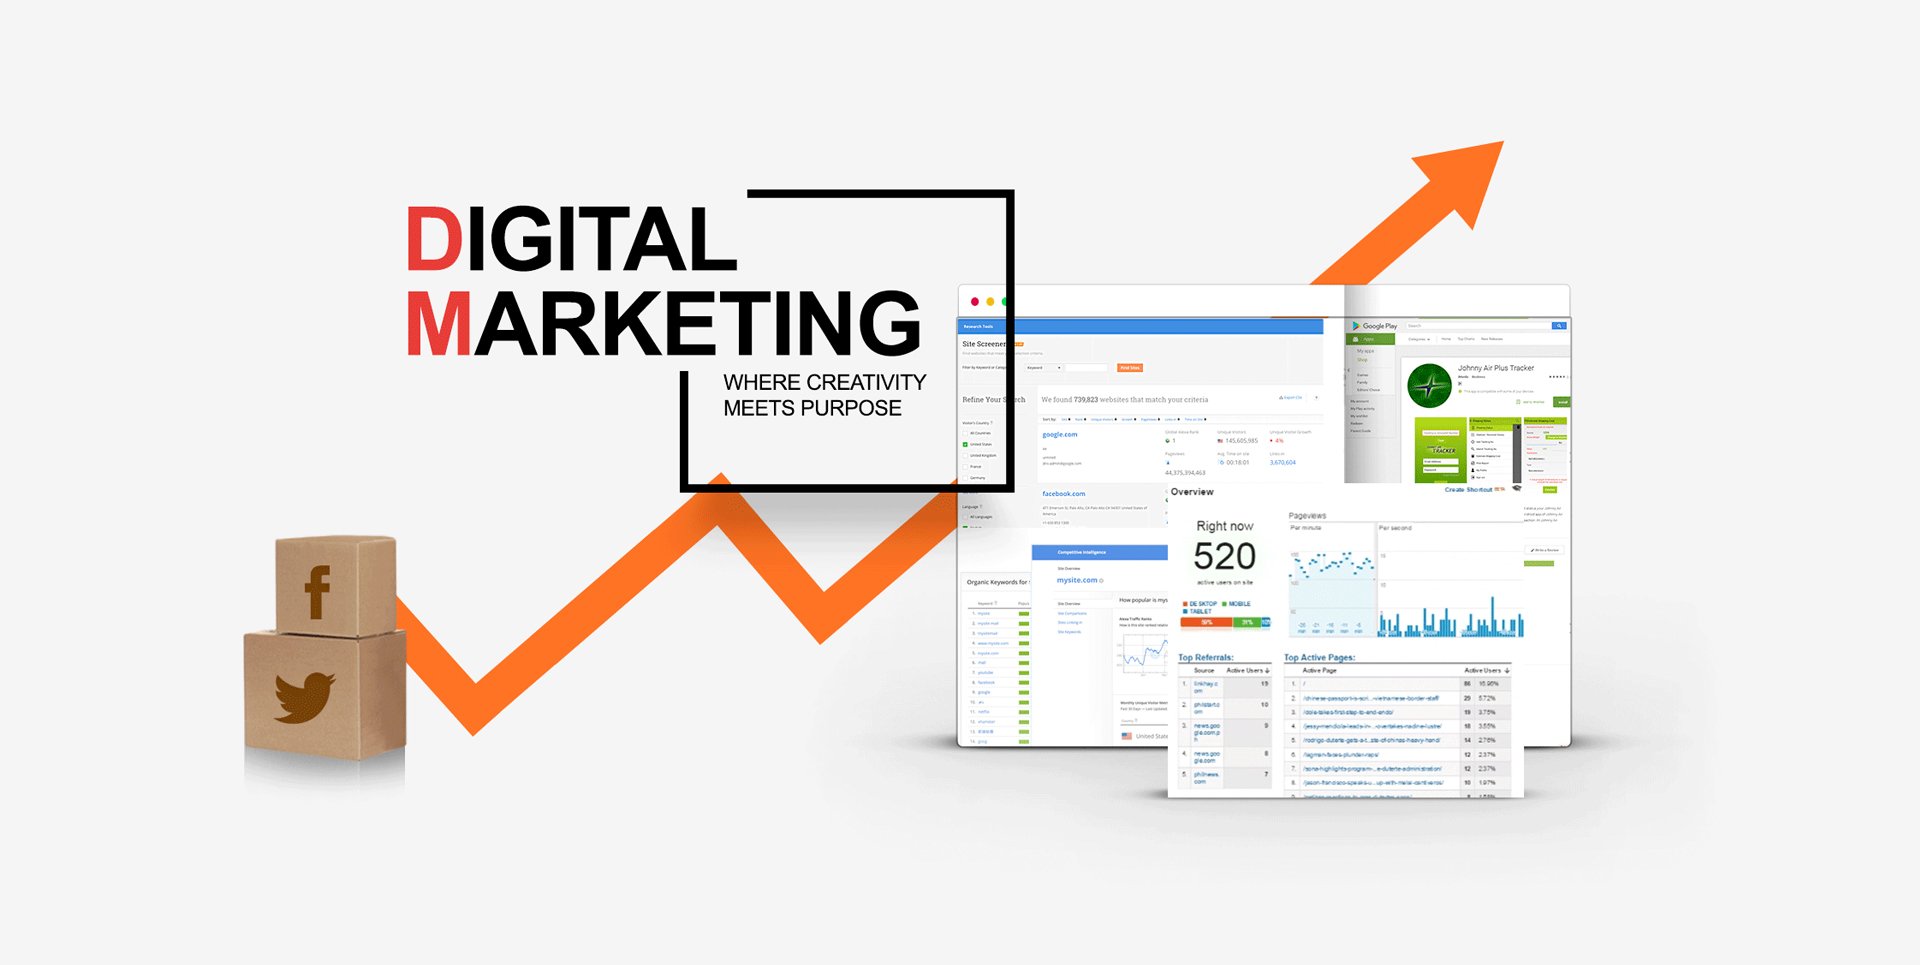 5 Reasons to Hire a Digital Marketing Agency for Small Businesses